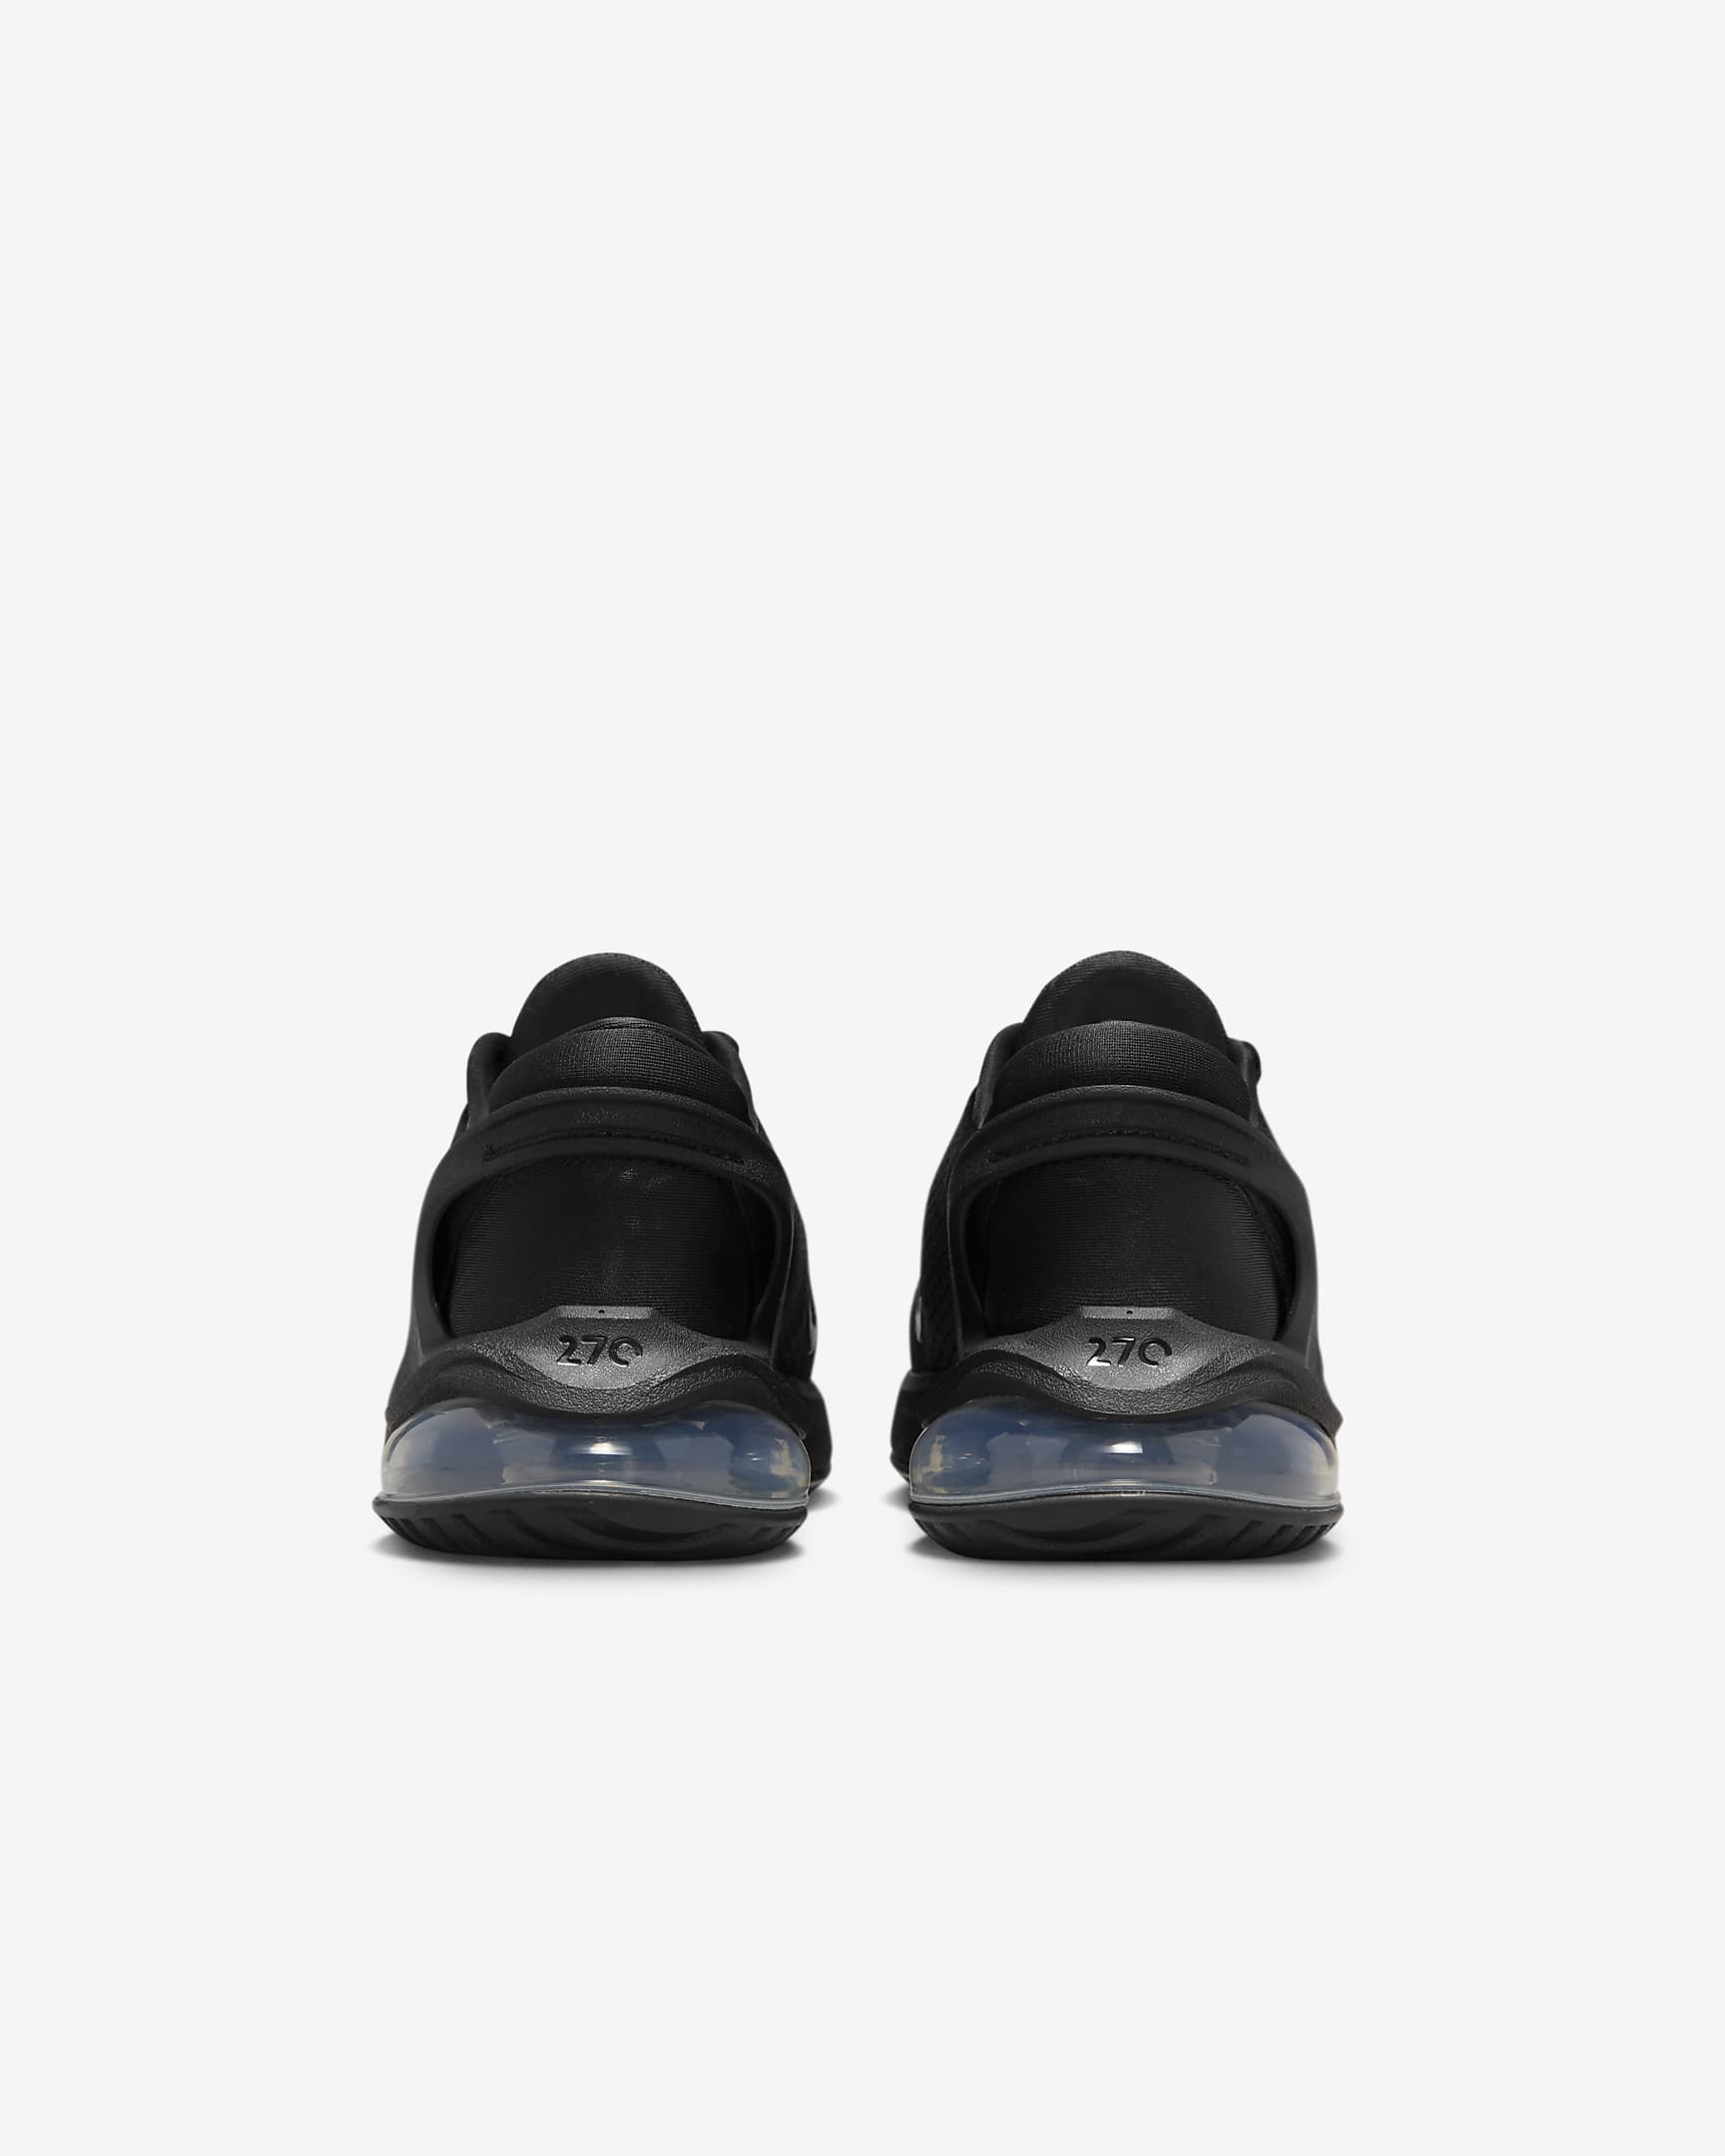 Nike Air Max 270 GO Older Kids' Easy On/Off Shoes. Nike CA